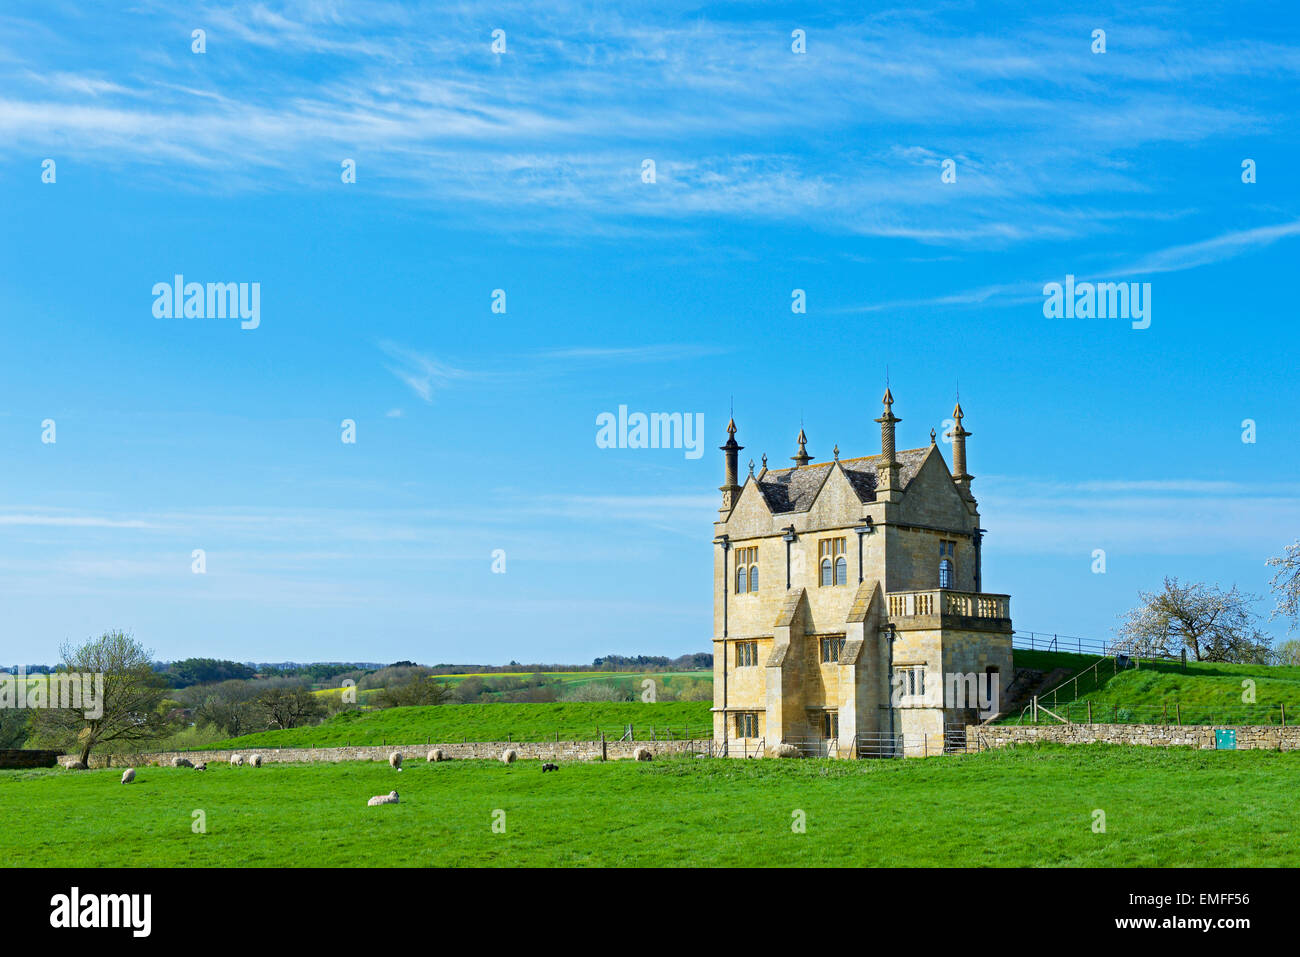 The East Banqueting House, Chipping Campden, Gloucestershire, Cotswolds, England UK Stock Photo